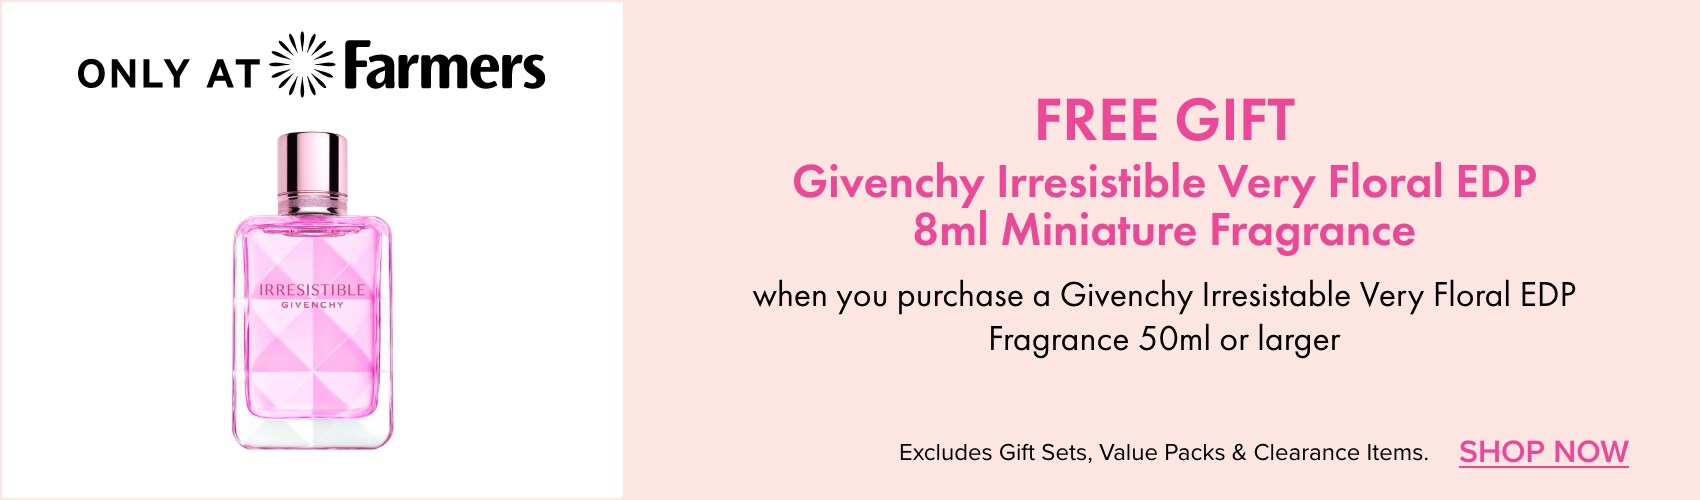 FREE GIFT Givenchy irresistible very floral EDP 8ml miniature fragrance 